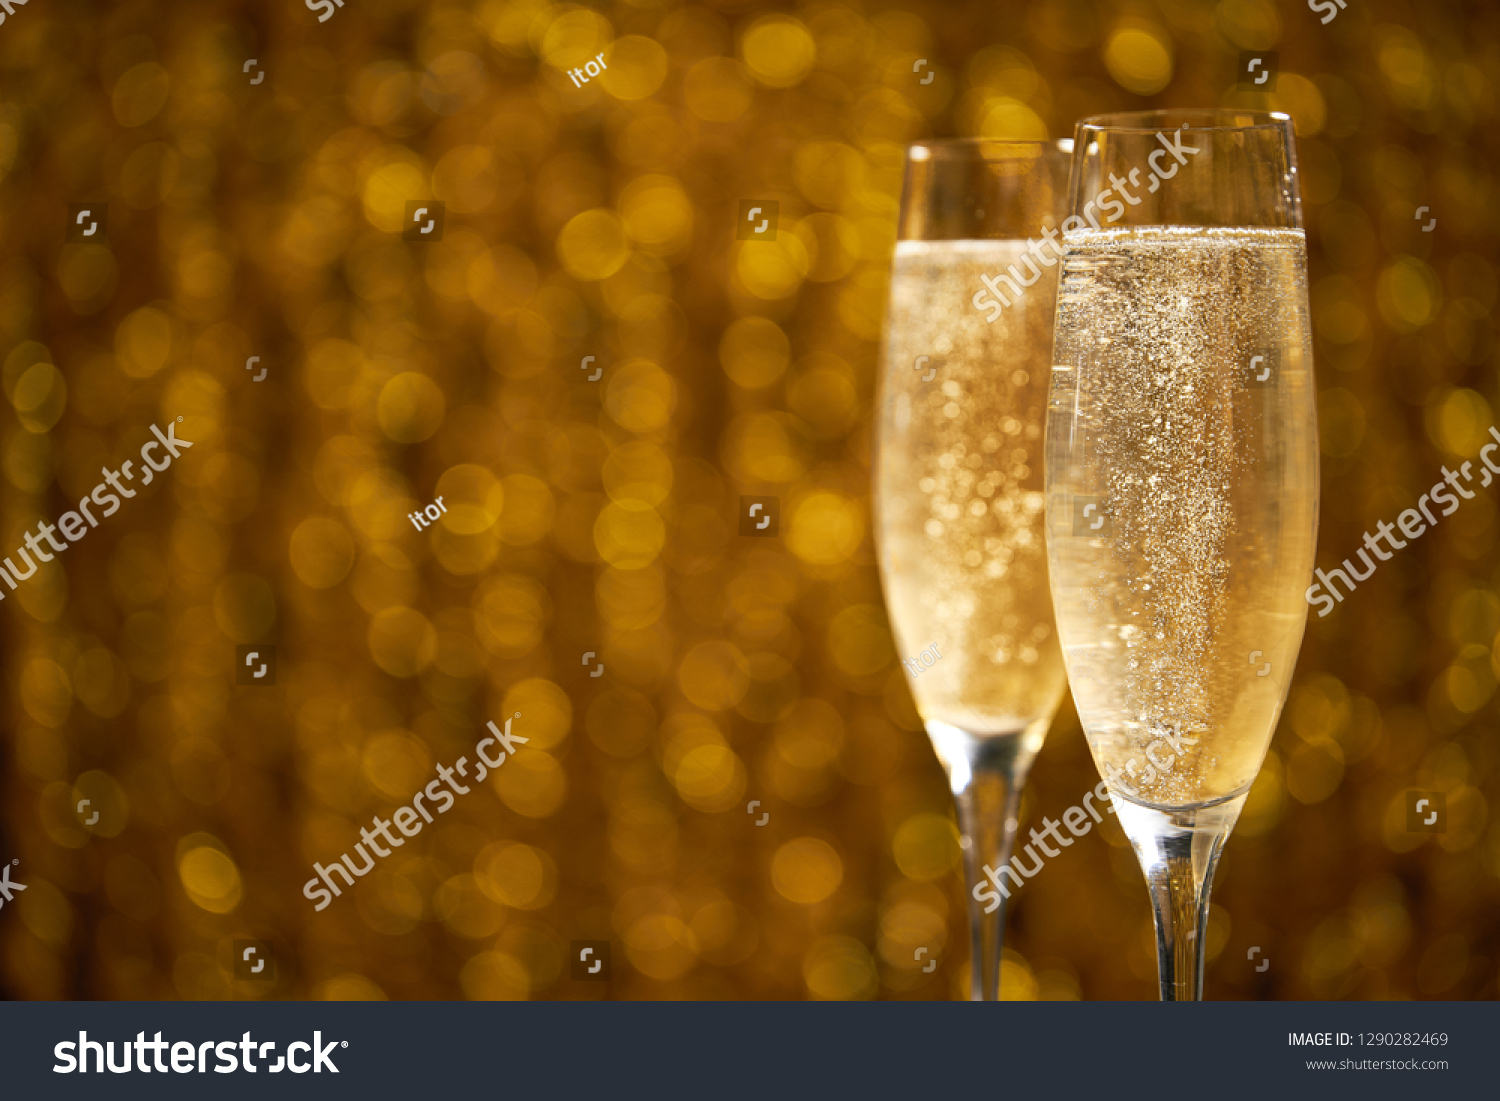 two glasses of champagne on golden stylish background with golden bokeh circles place for text #1290282469